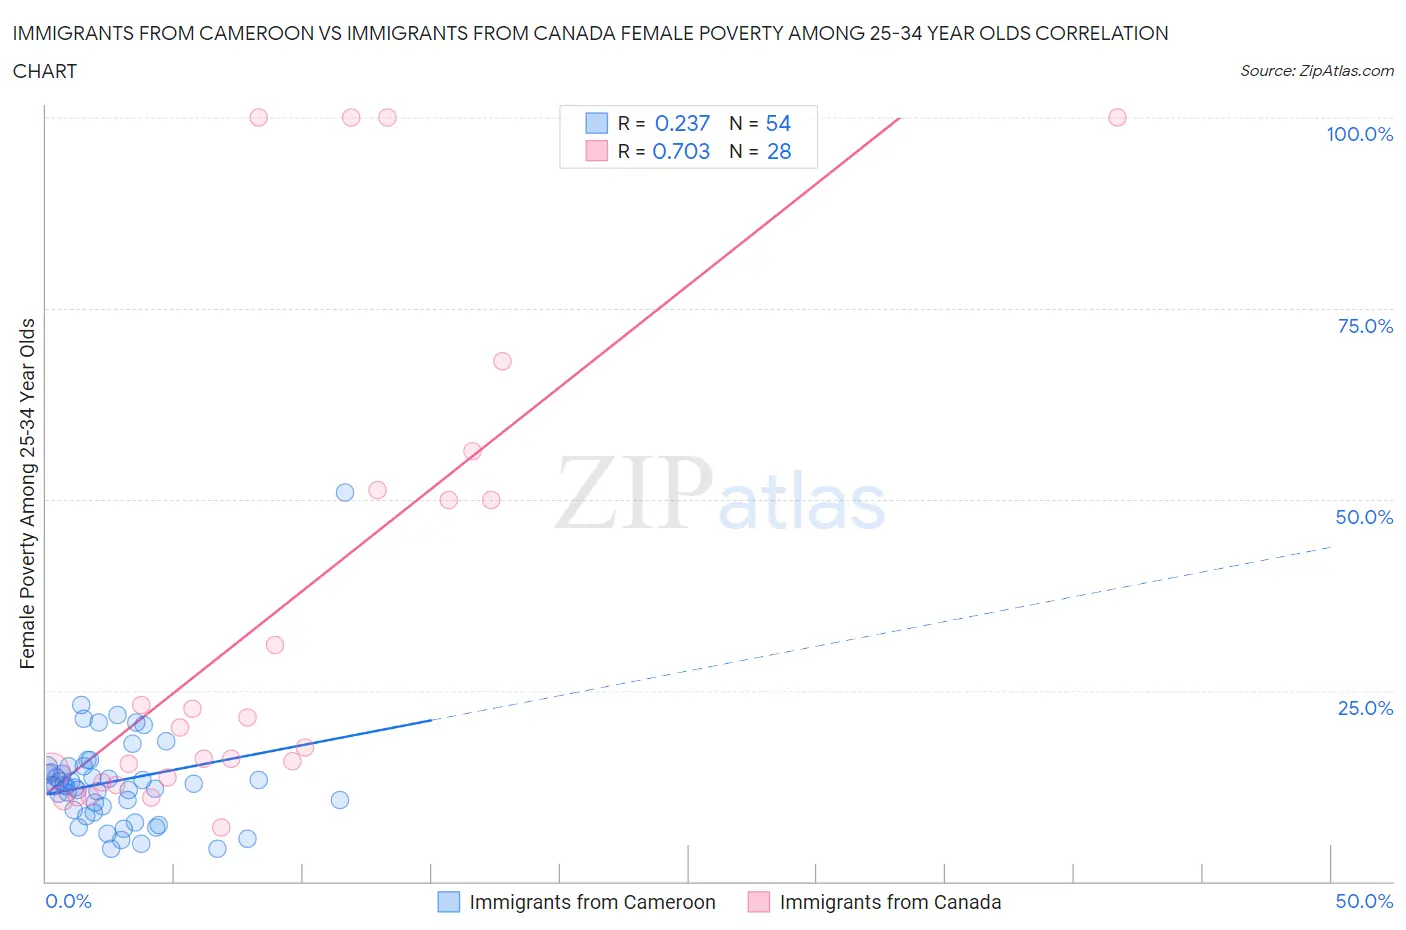 Immigrants from Cameroon vs Immigrants from Canada Female Poverty Among 25-34 Year Olds